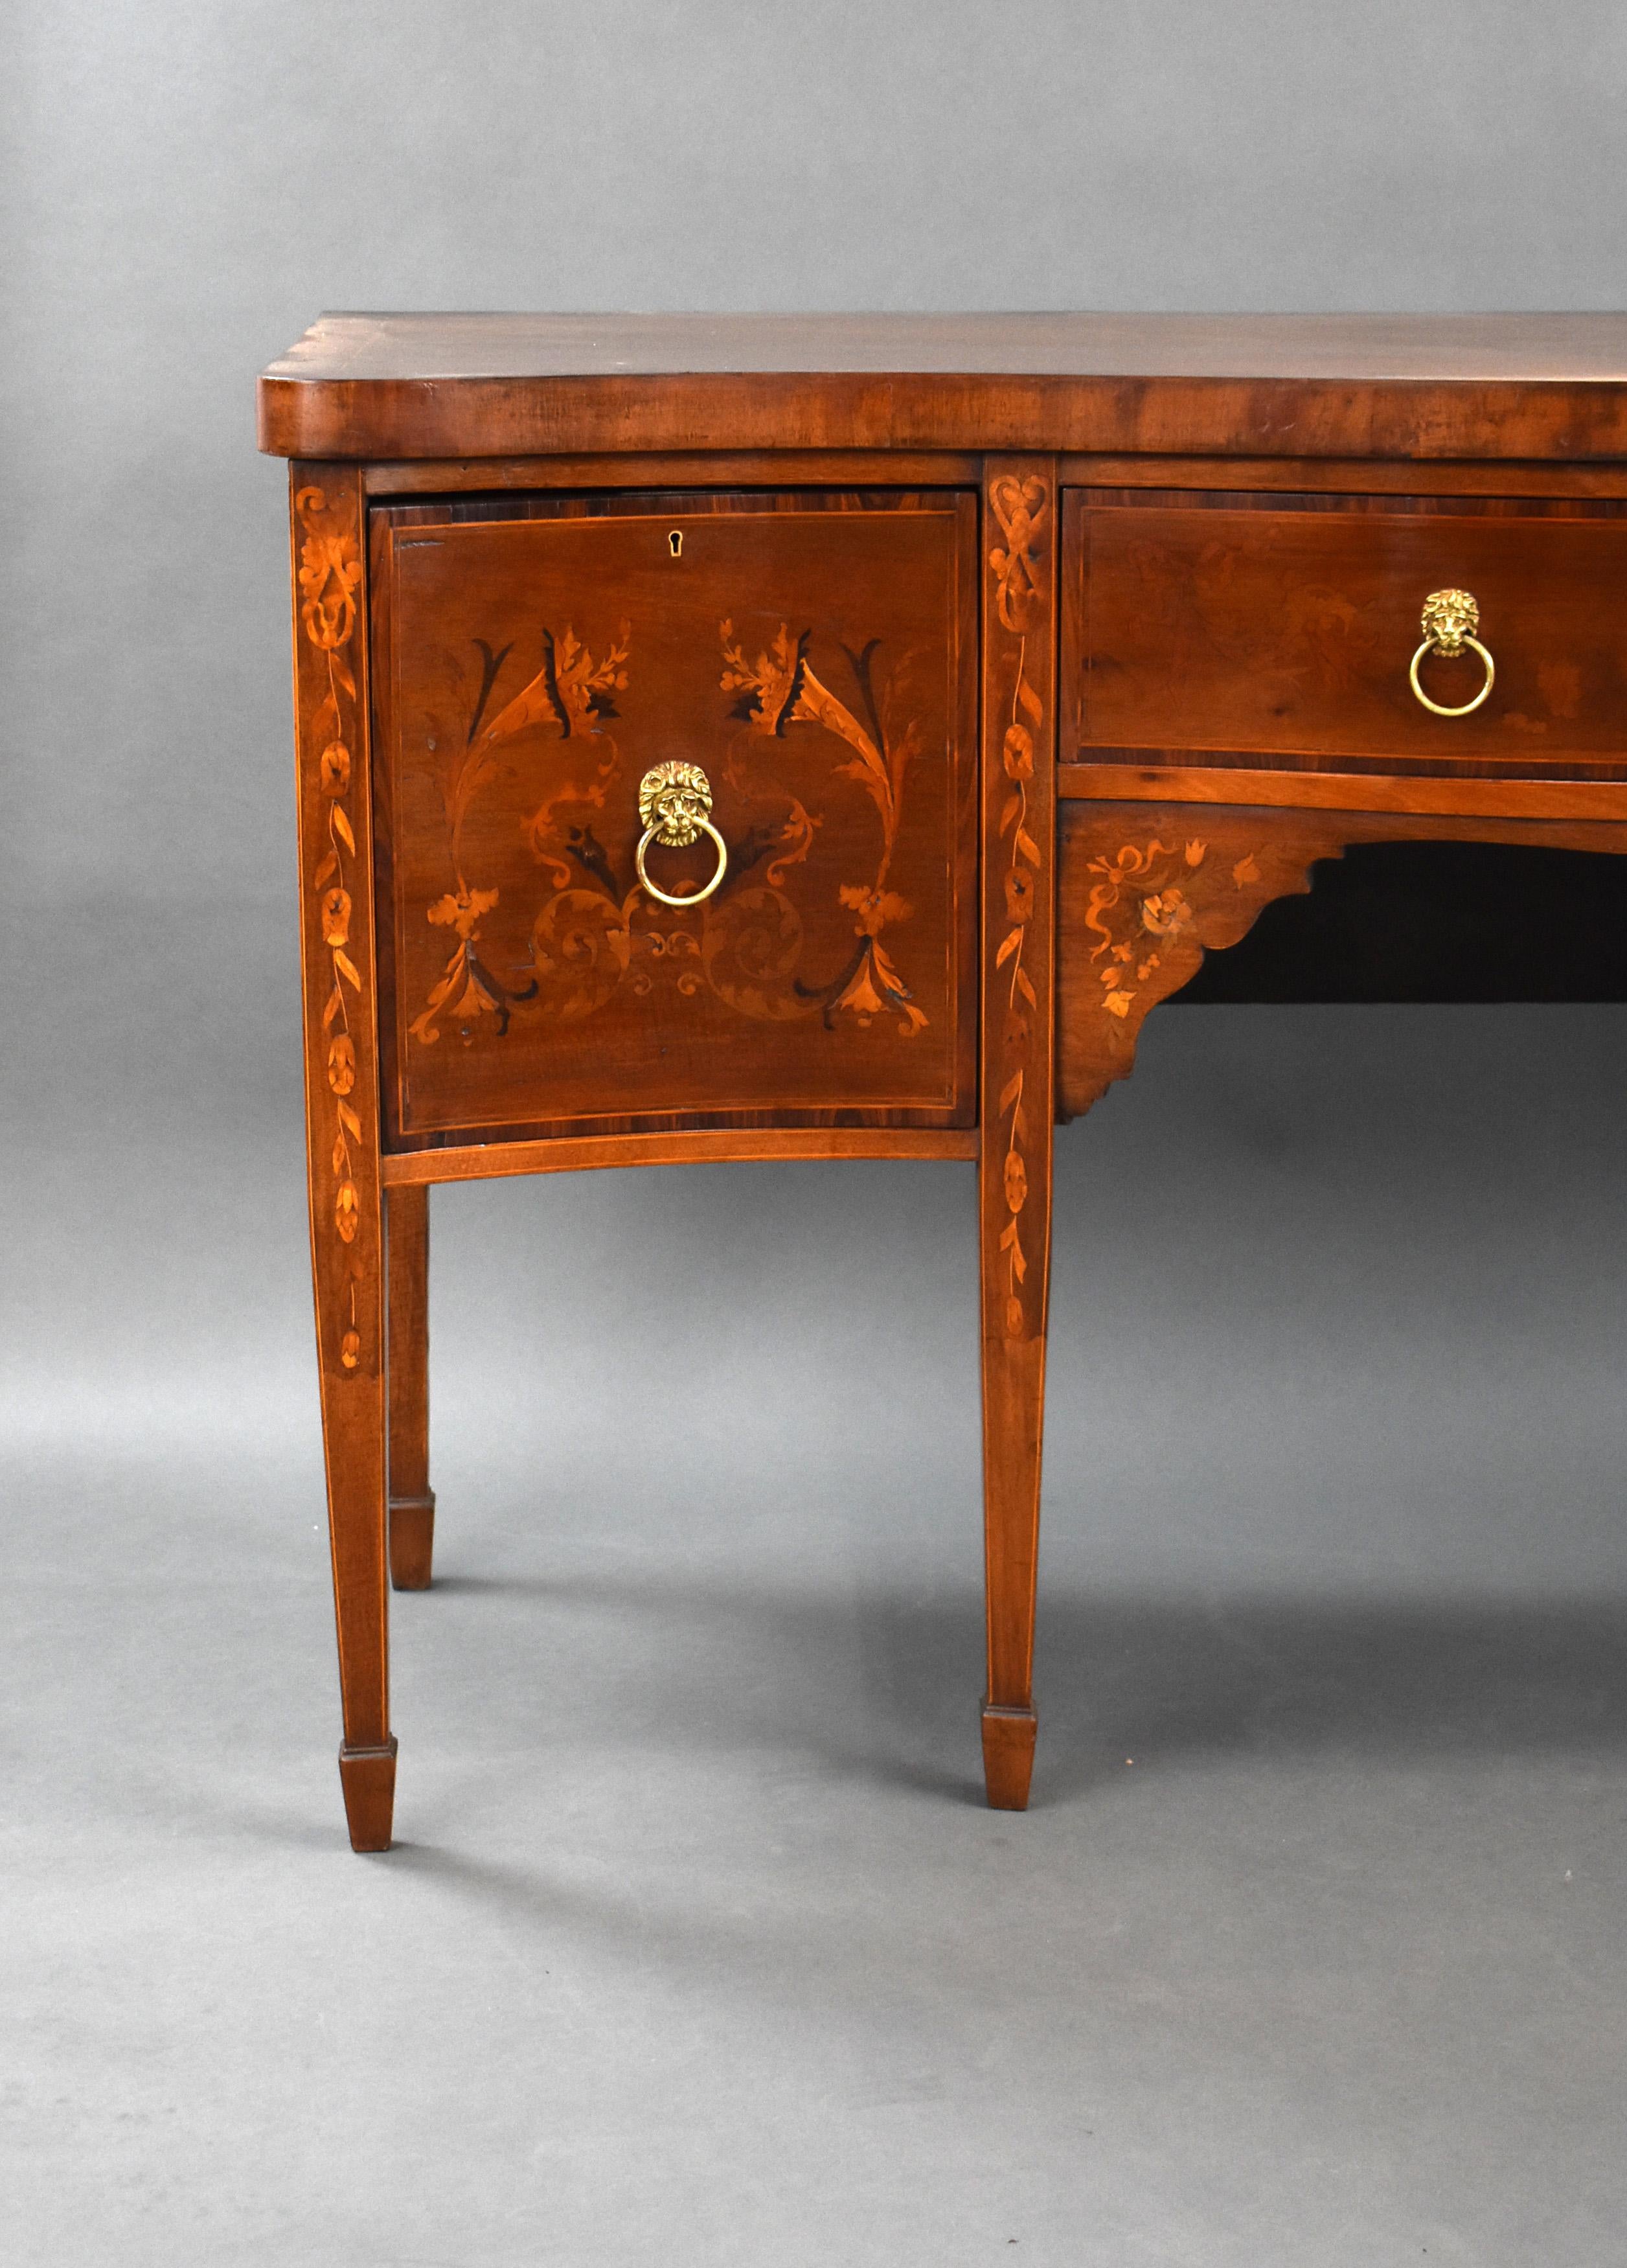 For sale is an Edwardian mahogany inlaid serpentine sideboard, remaining in very good condition, showing minor signs of wear commensurate with age and use.

Measures: width: 183cm, depth: 62cm, height: 95cm.